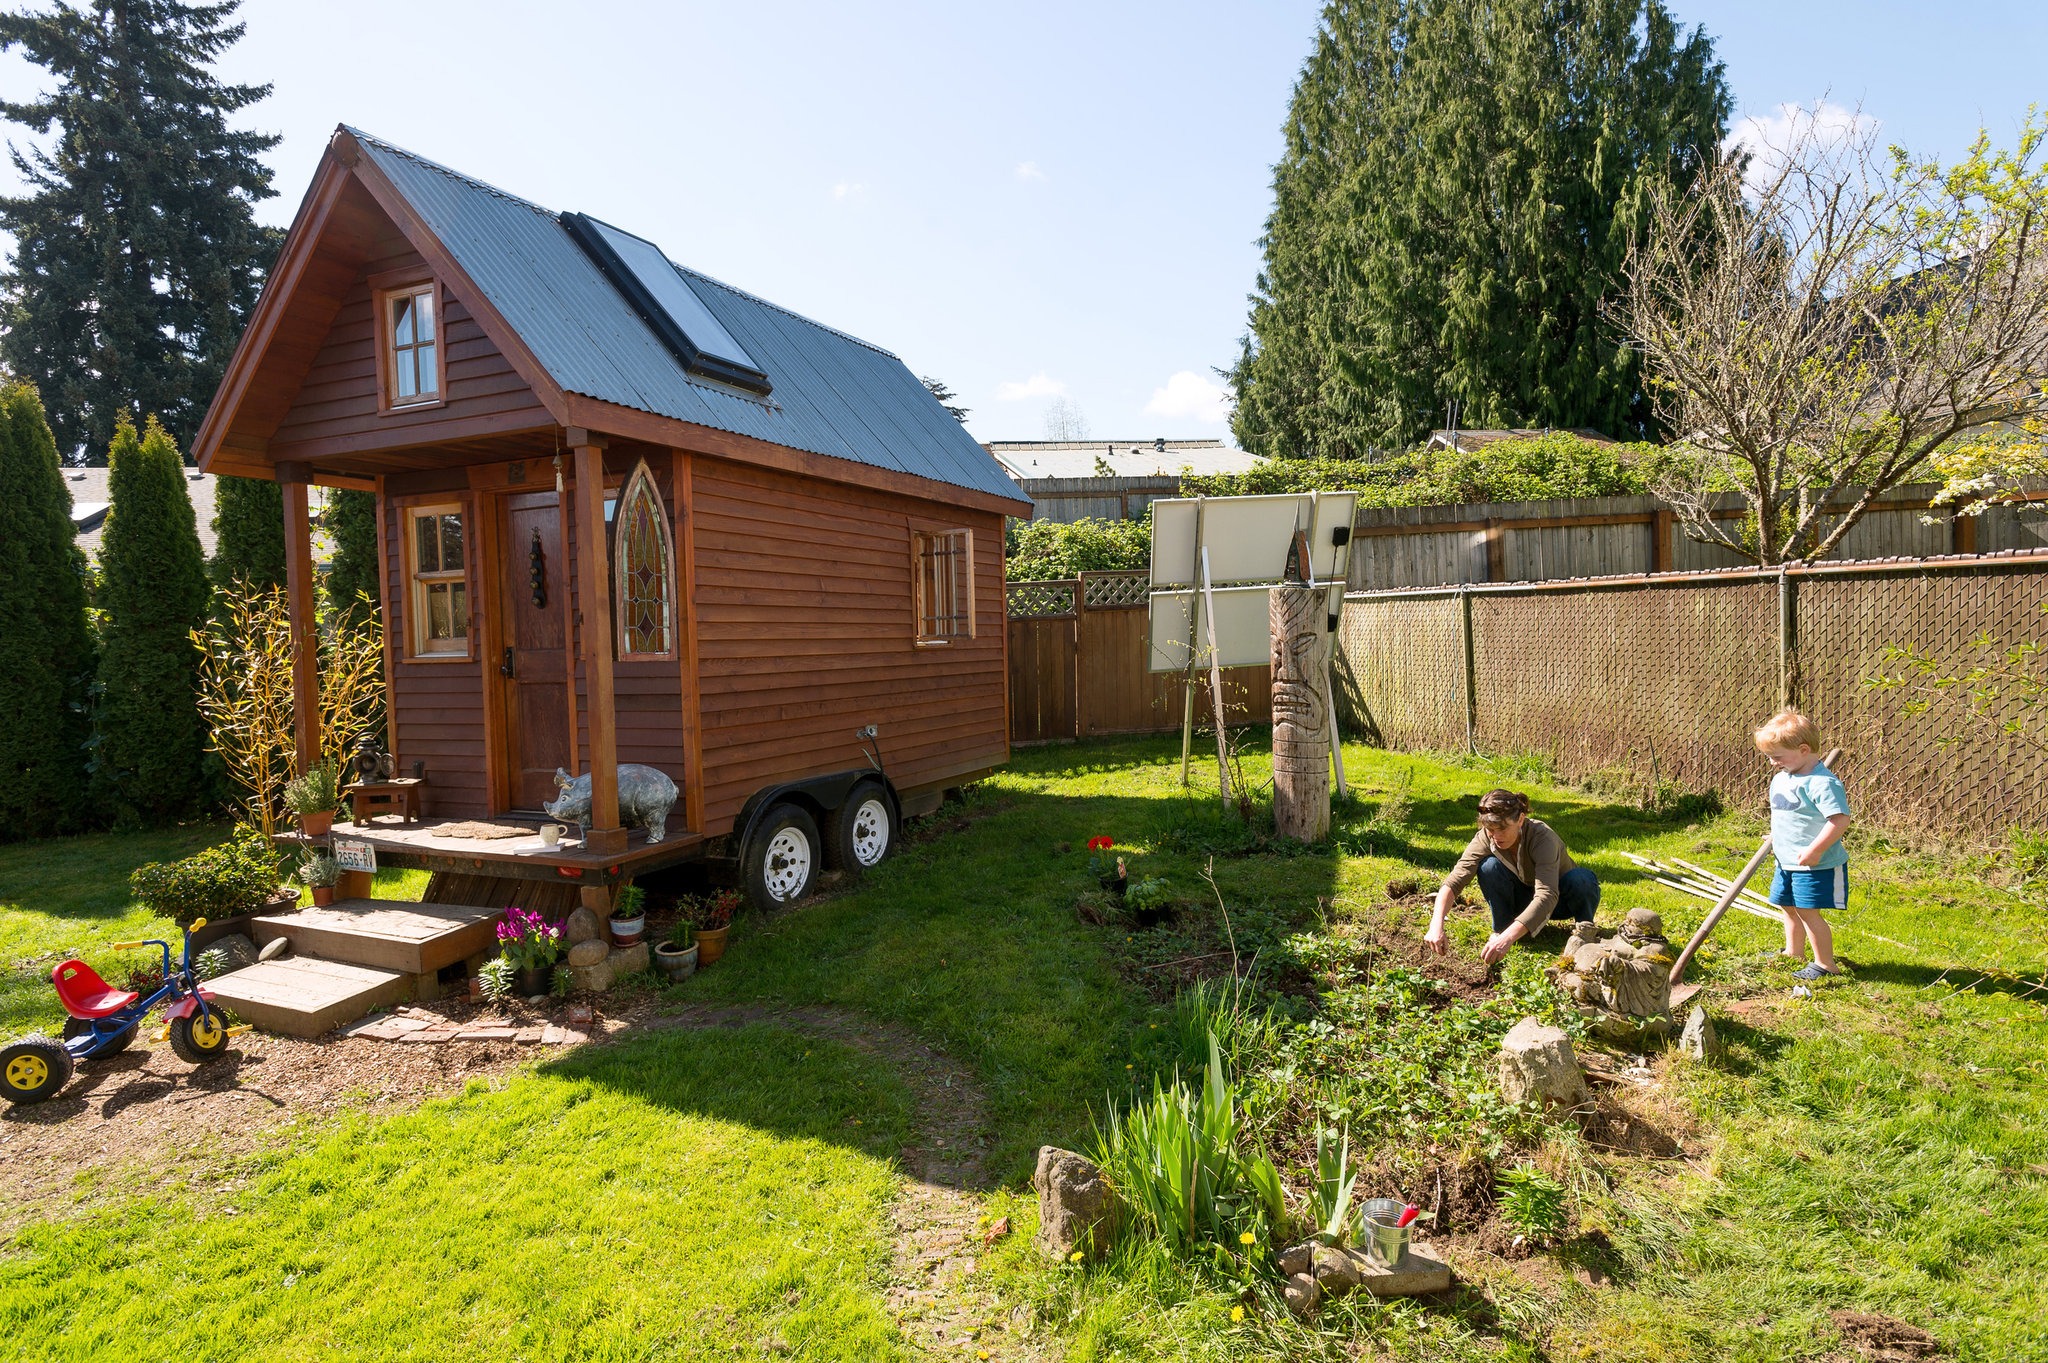 dee-williams-tiny-house-and-garden - padtinyhouses